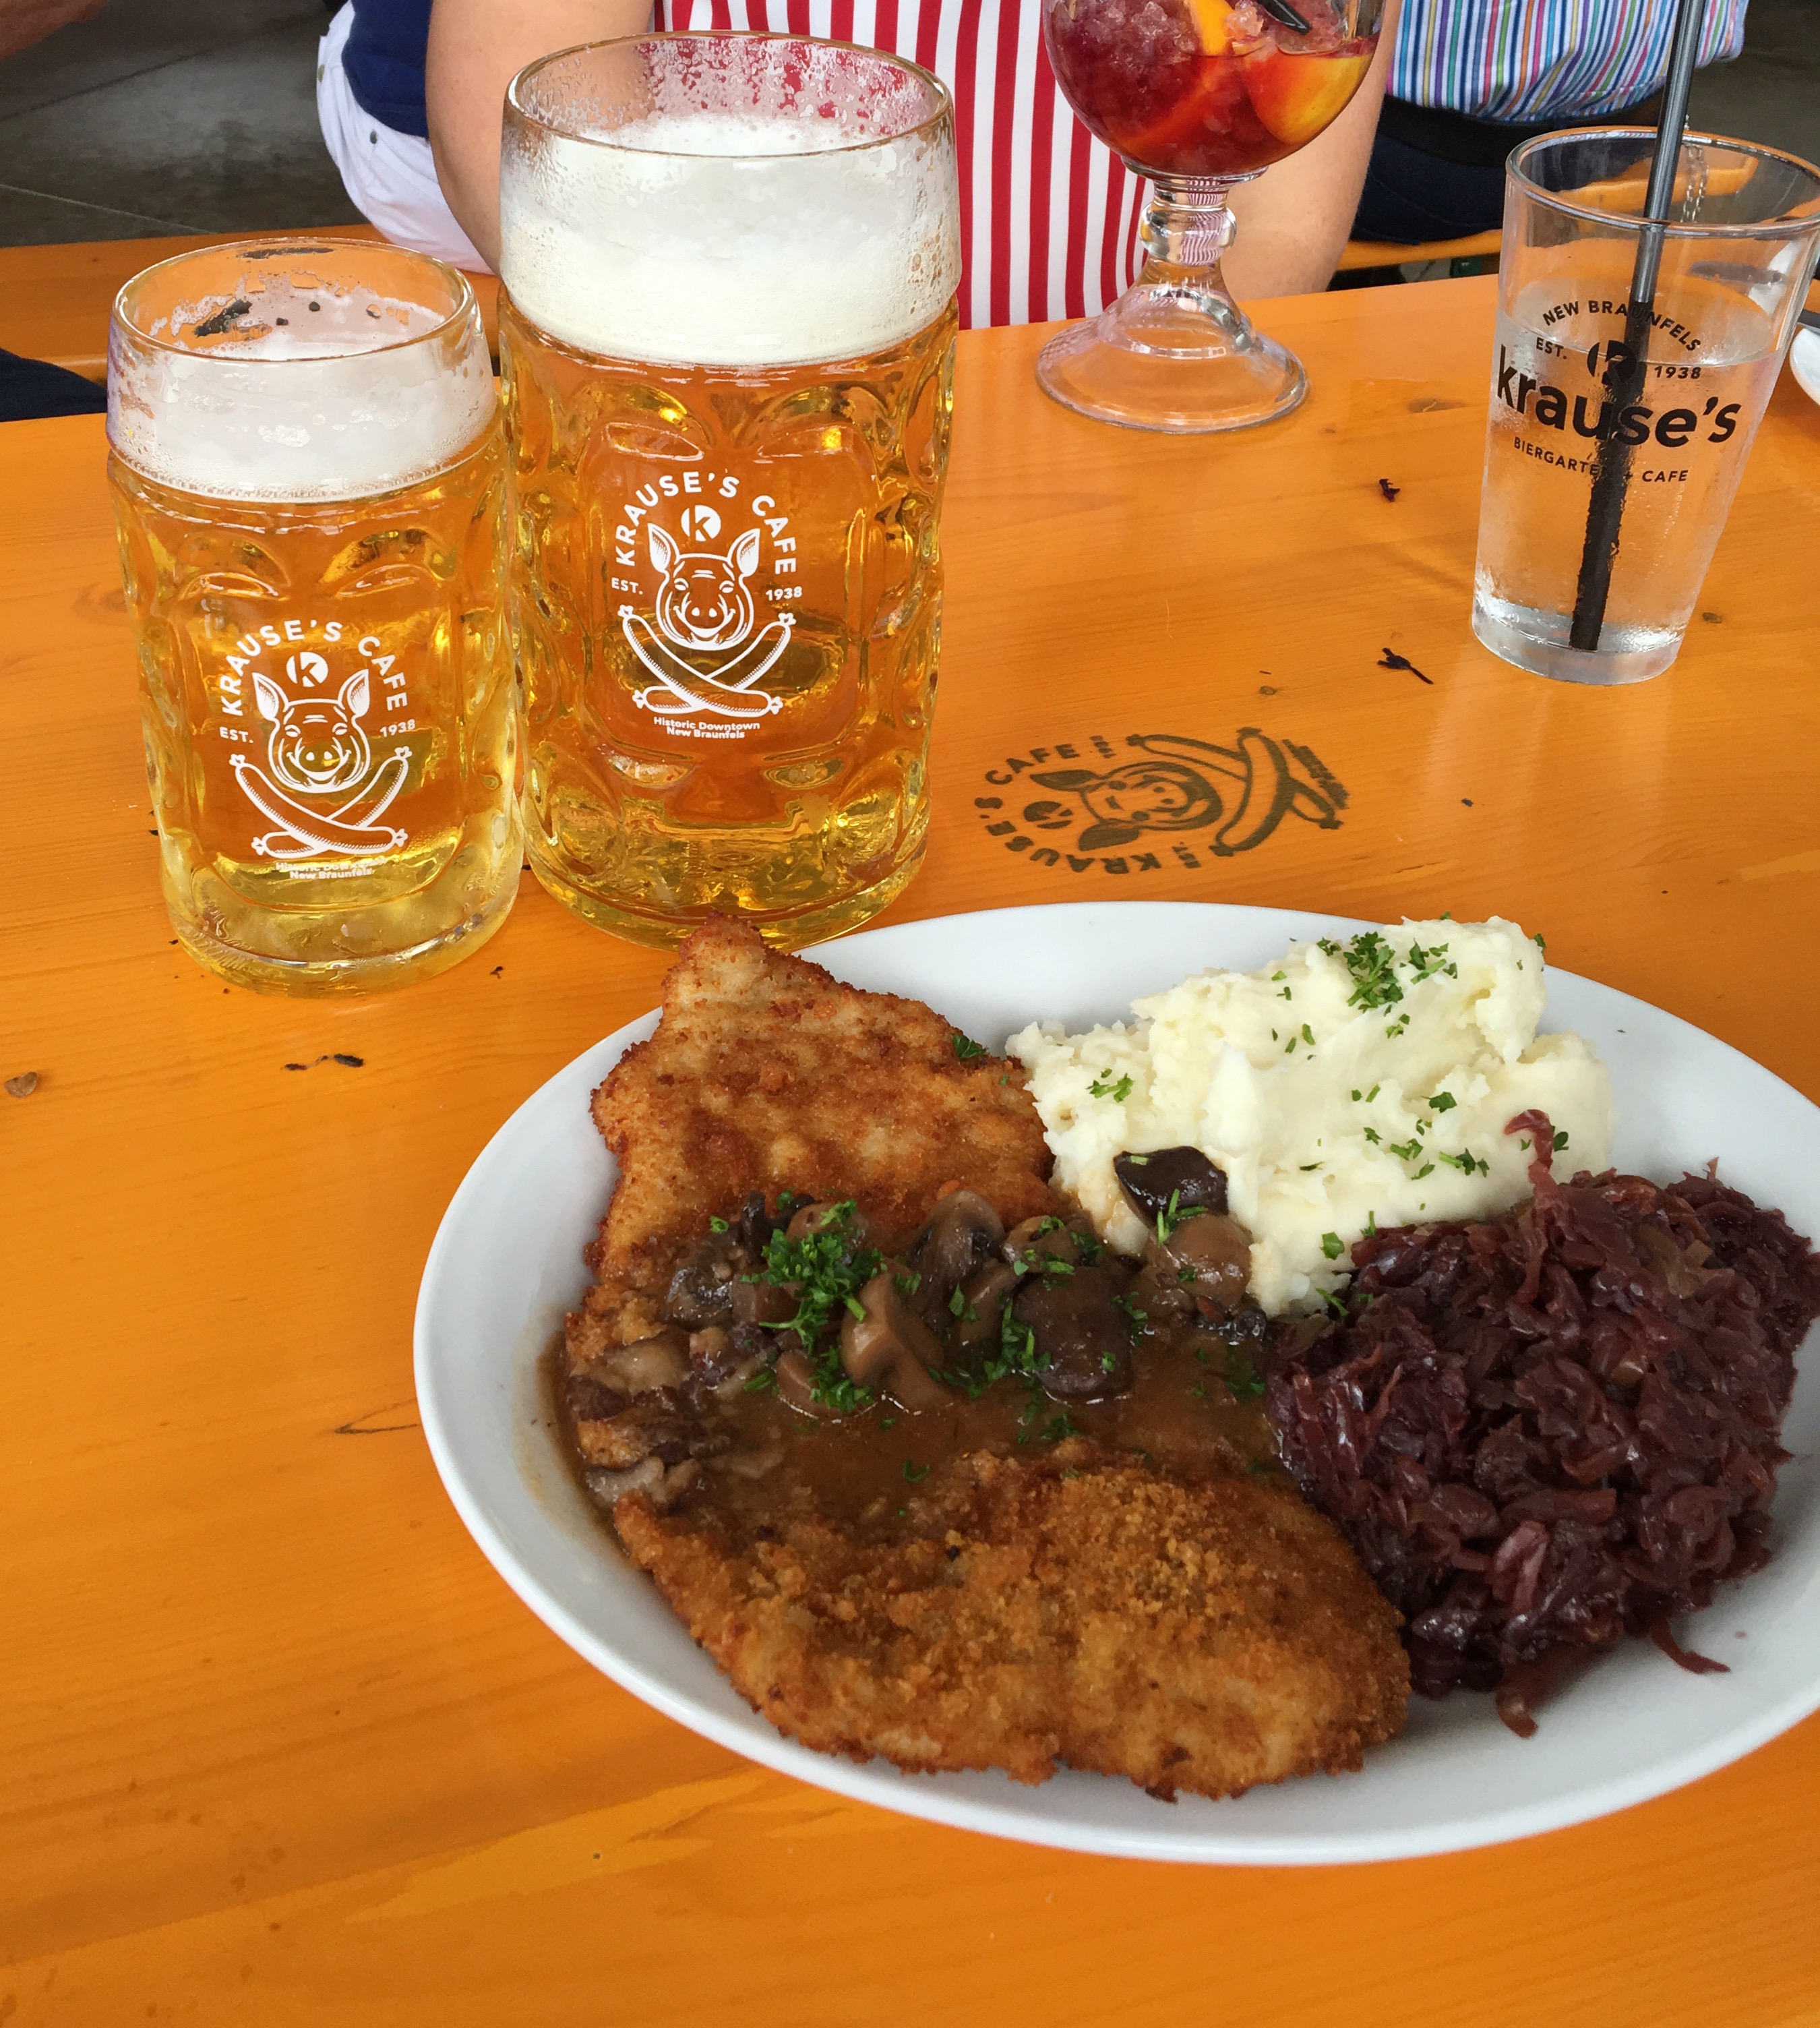 The Jager Schnitzel is a hallmark of German Cuisine. Krause's serves it well, with perfectly whipped mashed potatoes and caramelized red cabbage. 